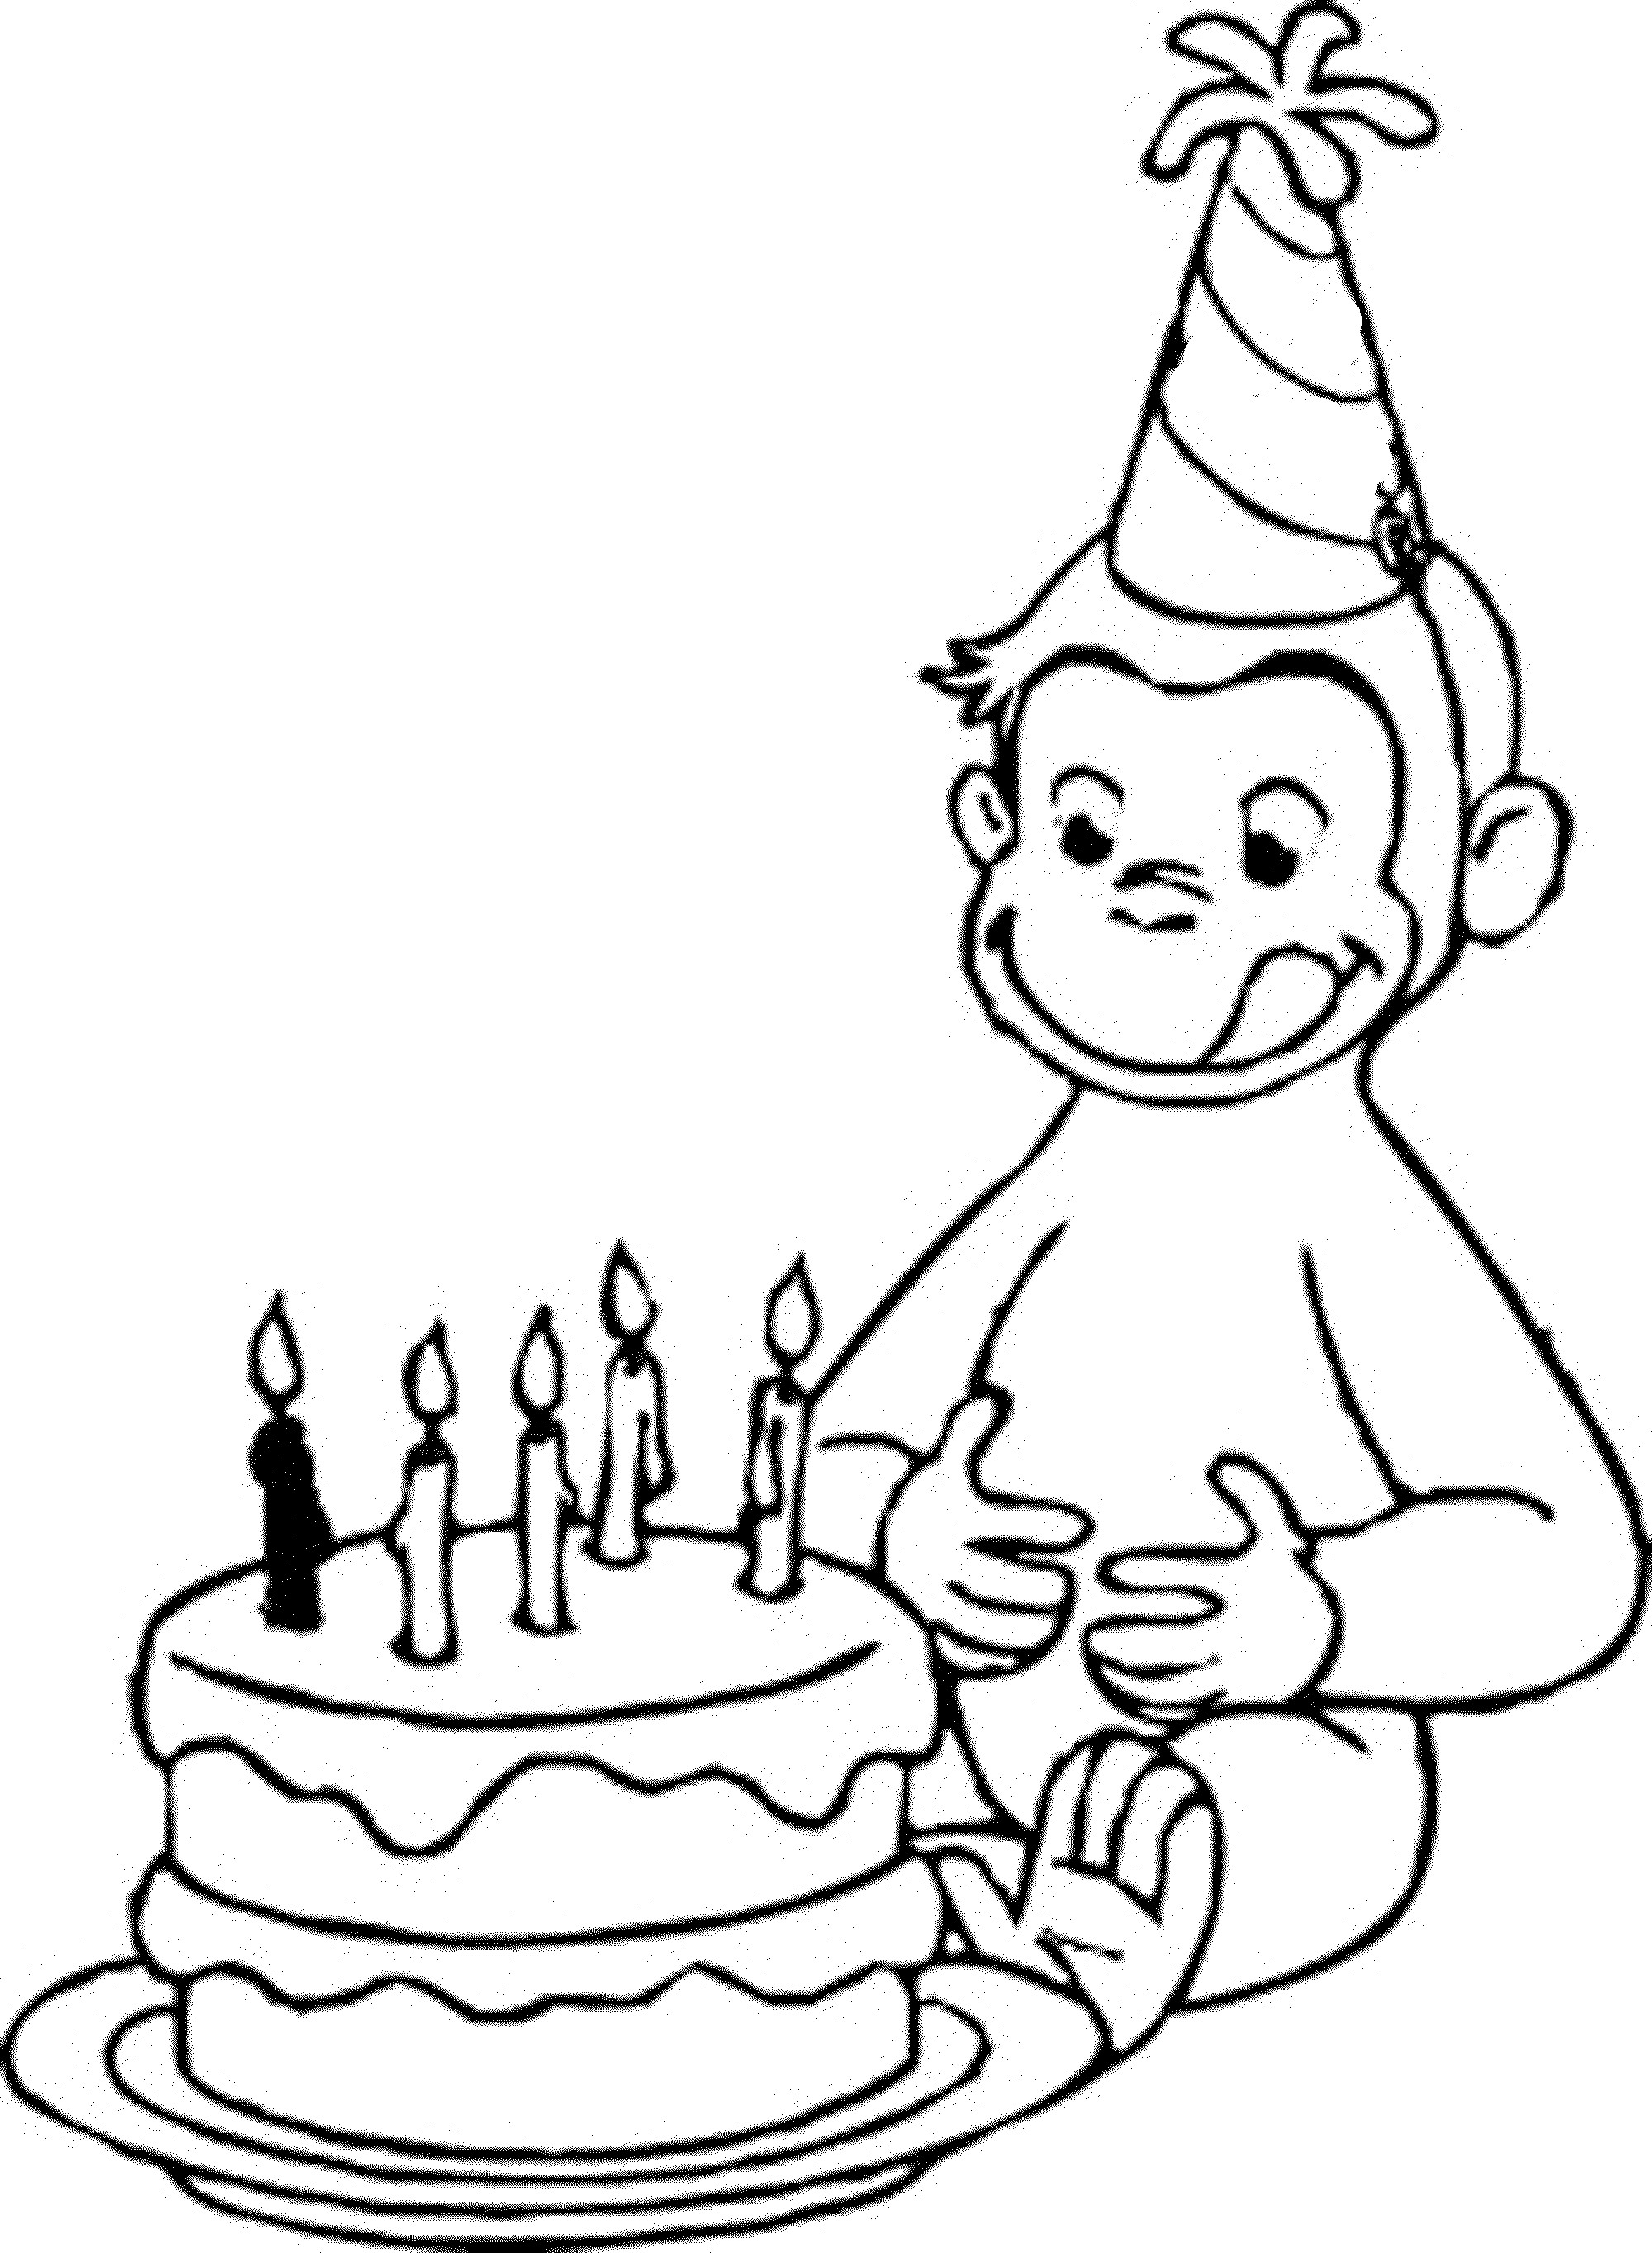 Coloring Sheets For Girls The Birthday Boy
 Happy Birthday Coloring Pages